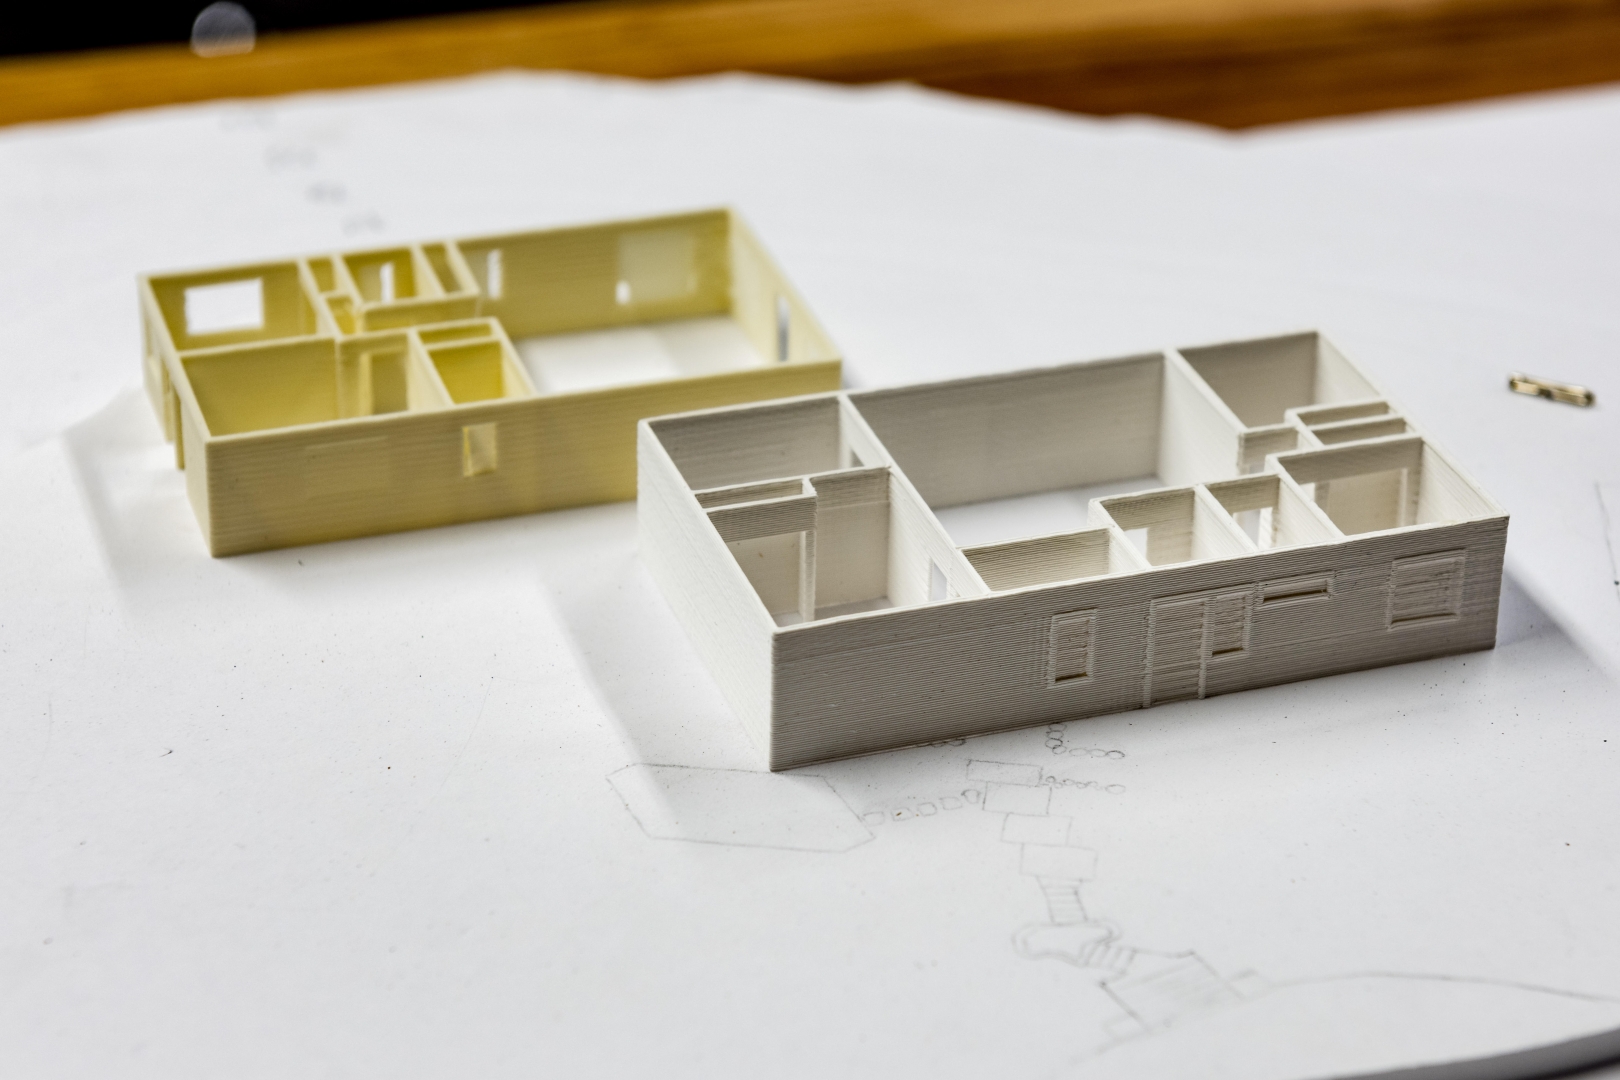 3D models of houses are sitting on a piece of paper that has landscaping drawn onto it.